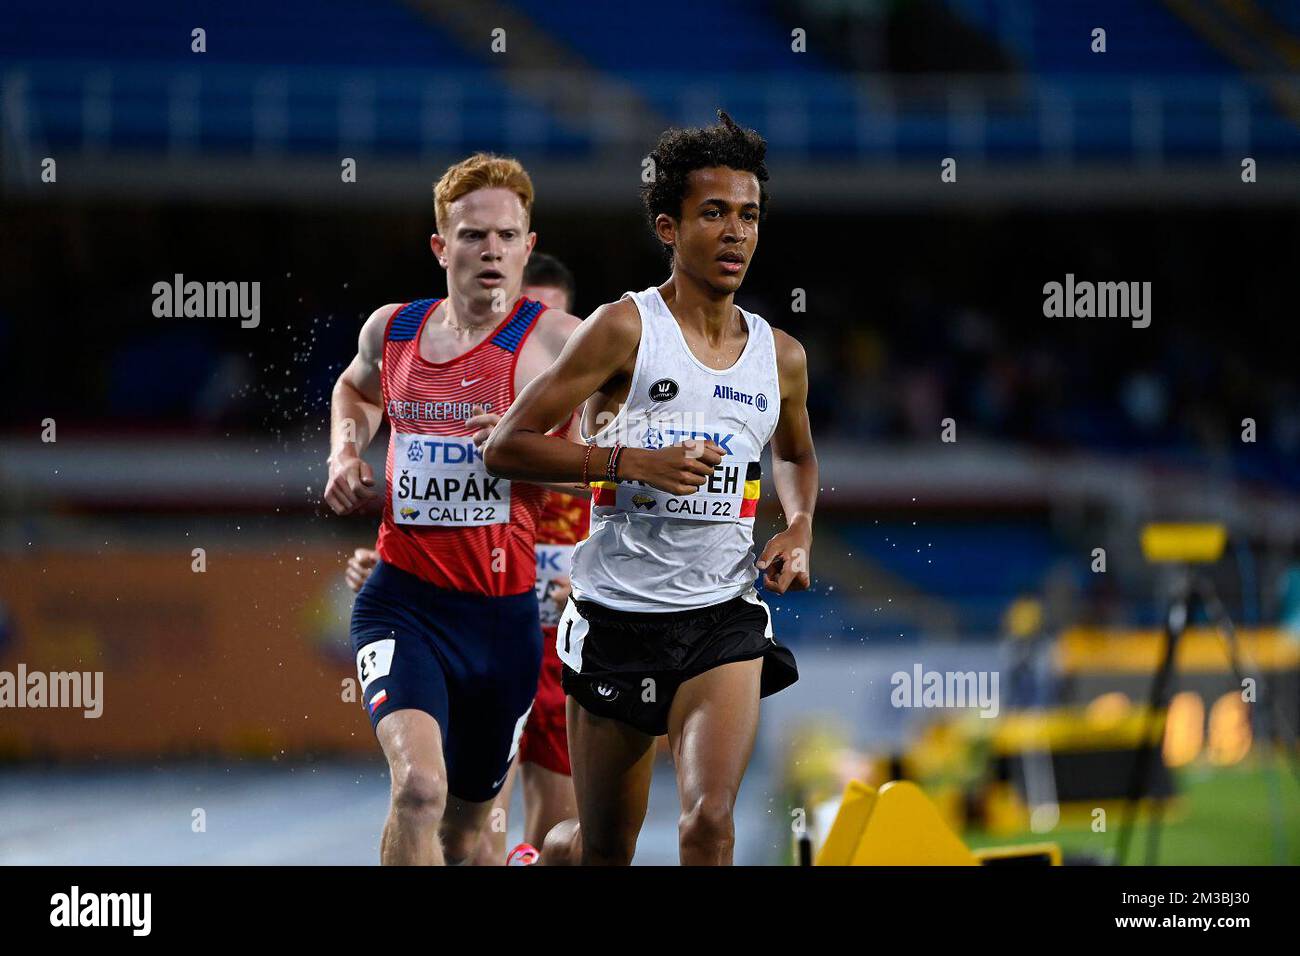 Belgian Noah Konteh pictured in action during the final of the men's 3000m, at the 'World Athletics' World Junior Athletics Championships, on Friday 05 August 2022 in Cali, Columbia. The World U20 Championships take place from August 1st until August 6th 2022. BELGA PHOTO THOMAS WINDESTAM Stock Photo